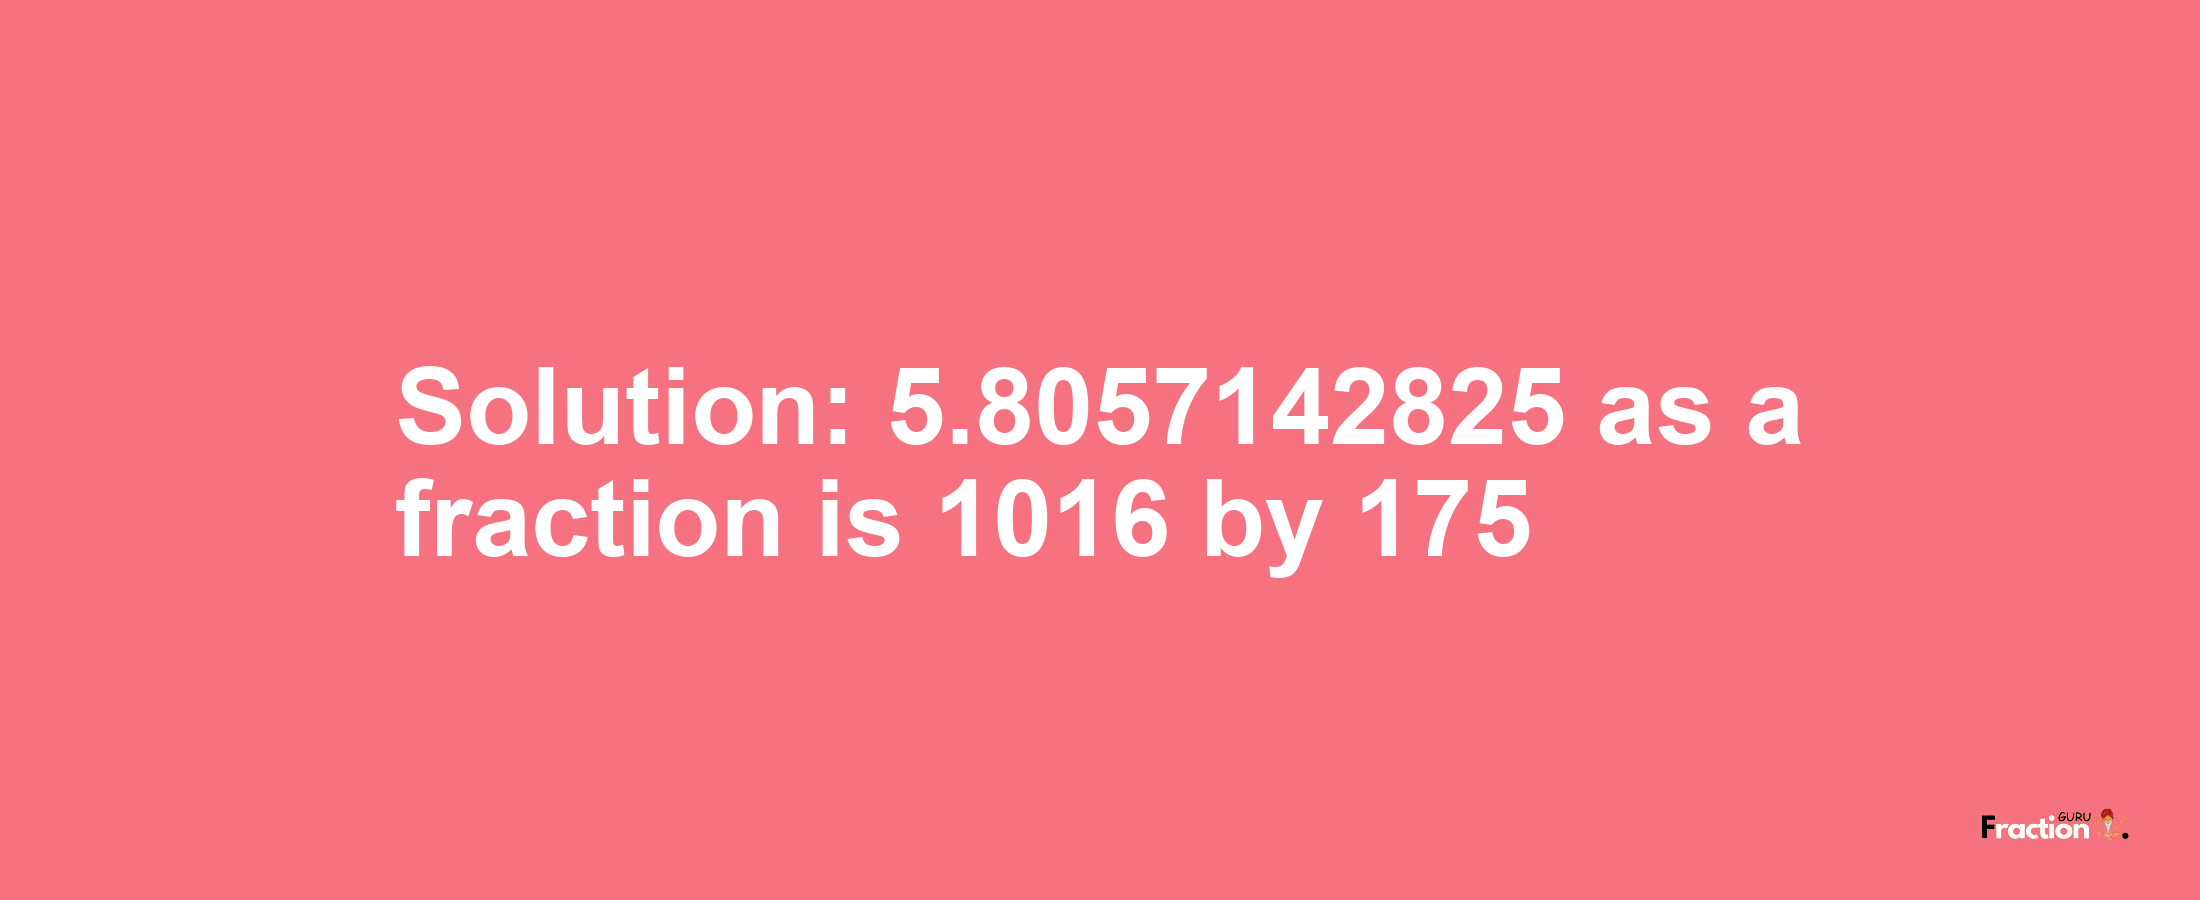 Solution:5.8057142825 as a fraction is 1016/175